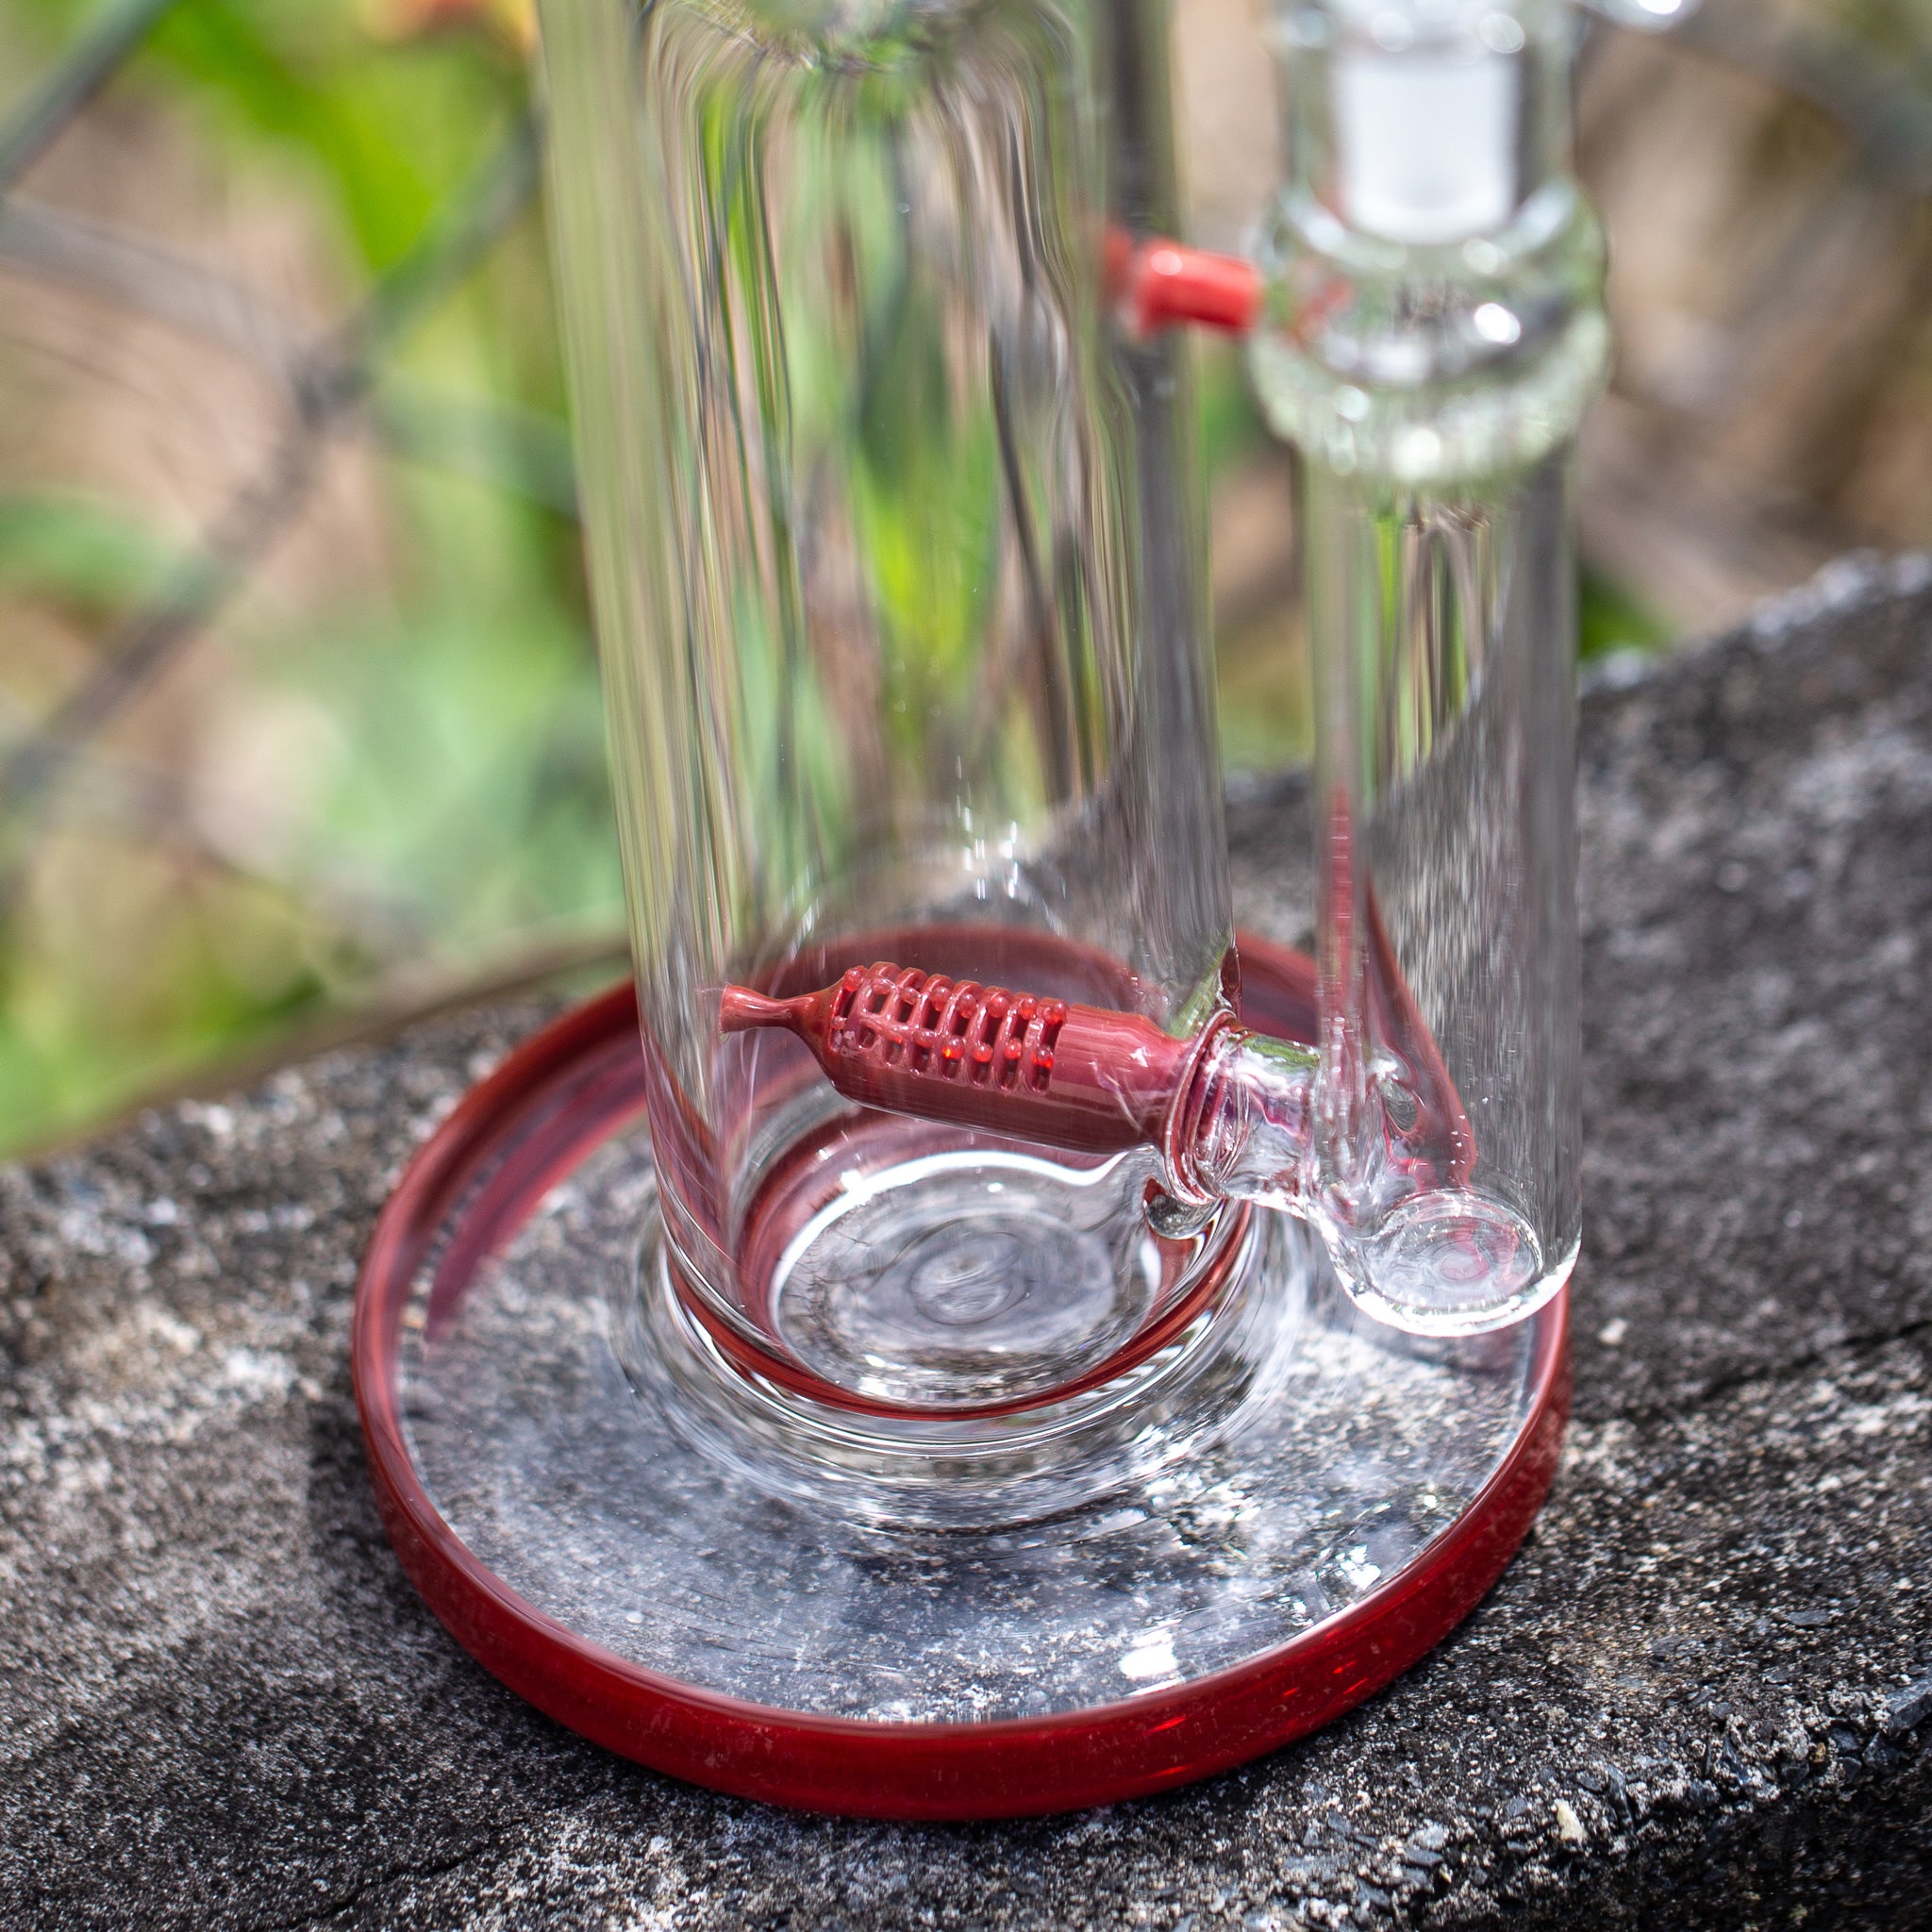 Glass bong percolator showing gridded inline diffuser.